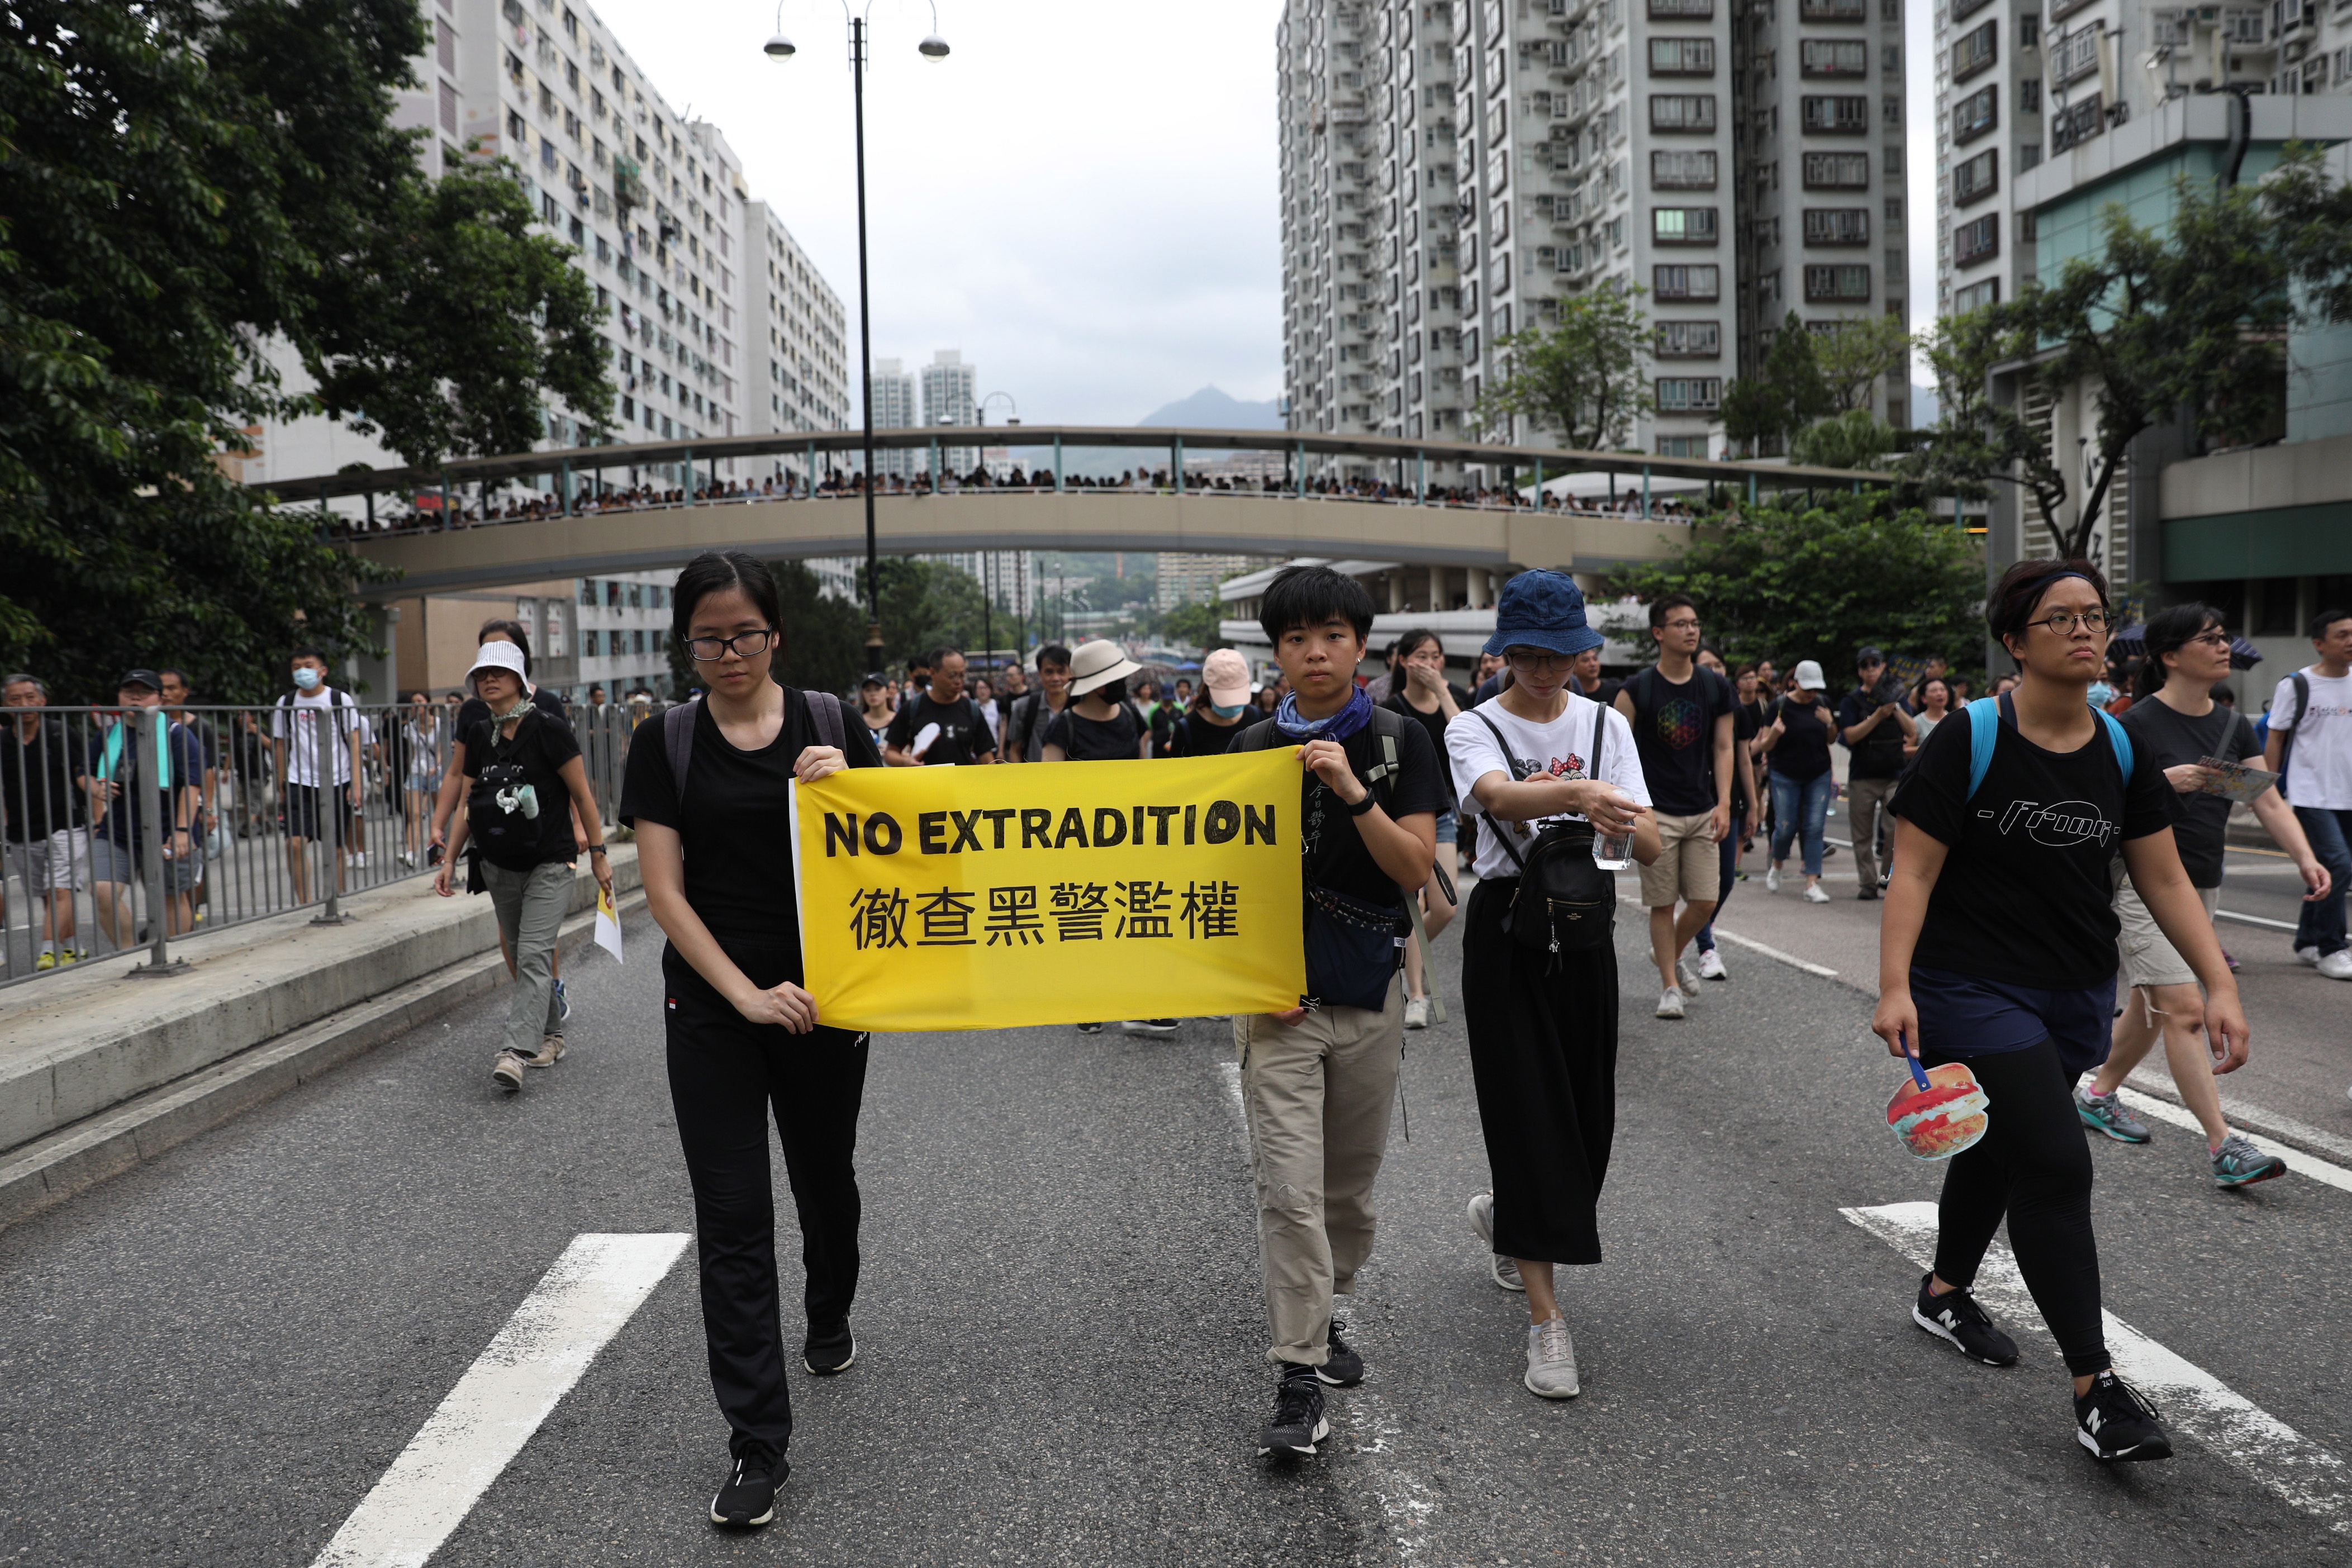 epa07715889 Anti-extradition bill protesters hold a banner 'No Extradition' as they march during a rally in Shatin, Hong Kong, China, 14 July 2019. Spurred by the momentum of the anti-extradition movement, the protesters are demanding the complete withdrawal of the extradition bill, which would have allowed the transfer of fugitives to mainland China, and unconditional release of all arrested protesters among other demands.  EPA/JEROME FAVRE